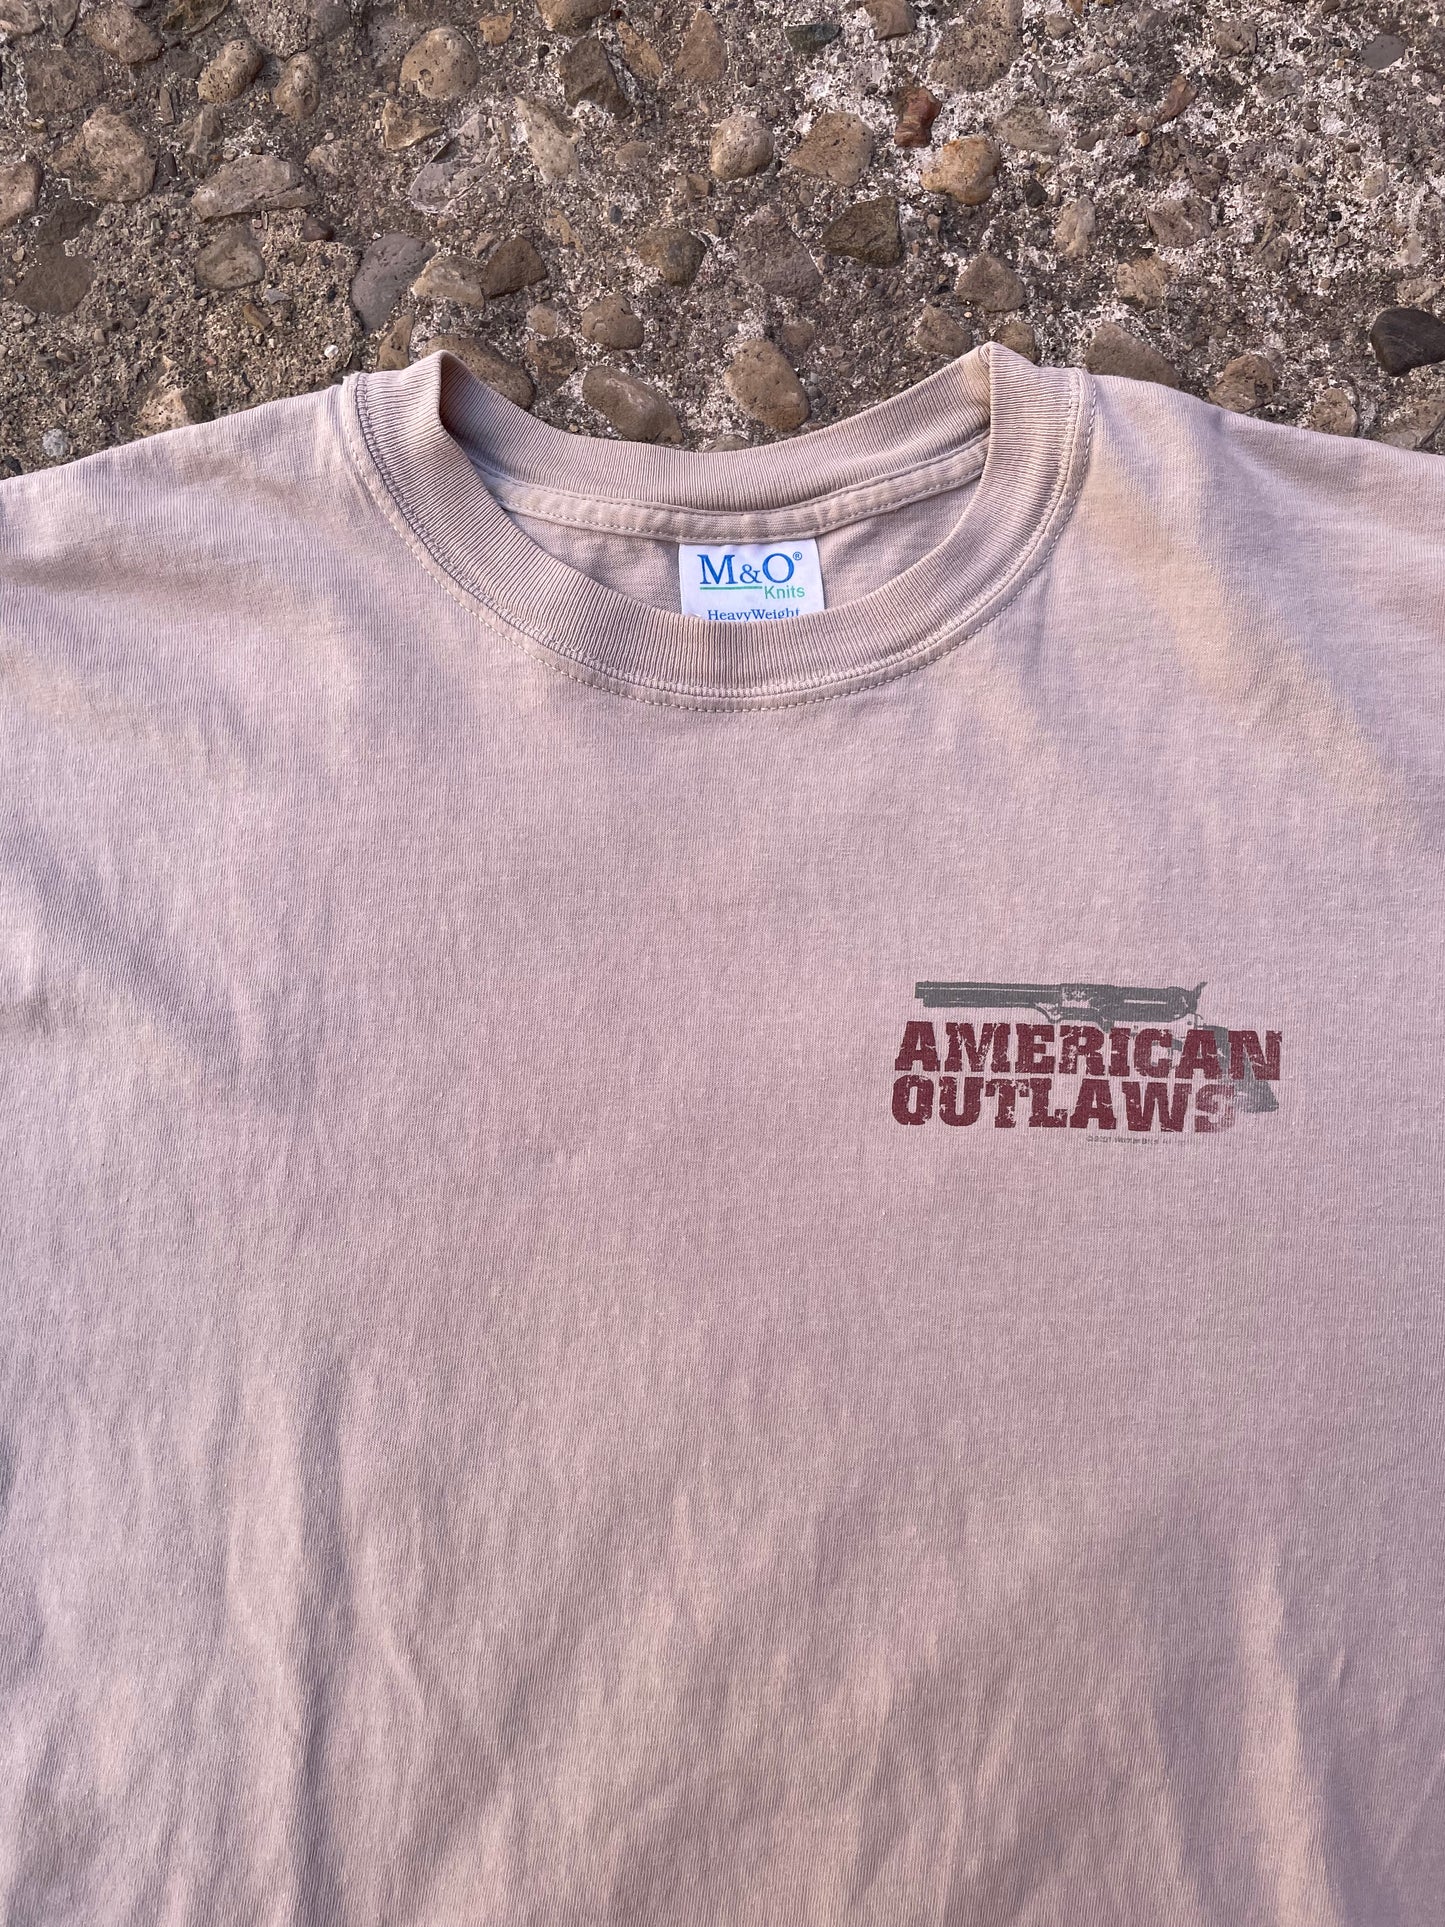 2001 American Outlaws Movie Promo Graphic T-Shirt - XL